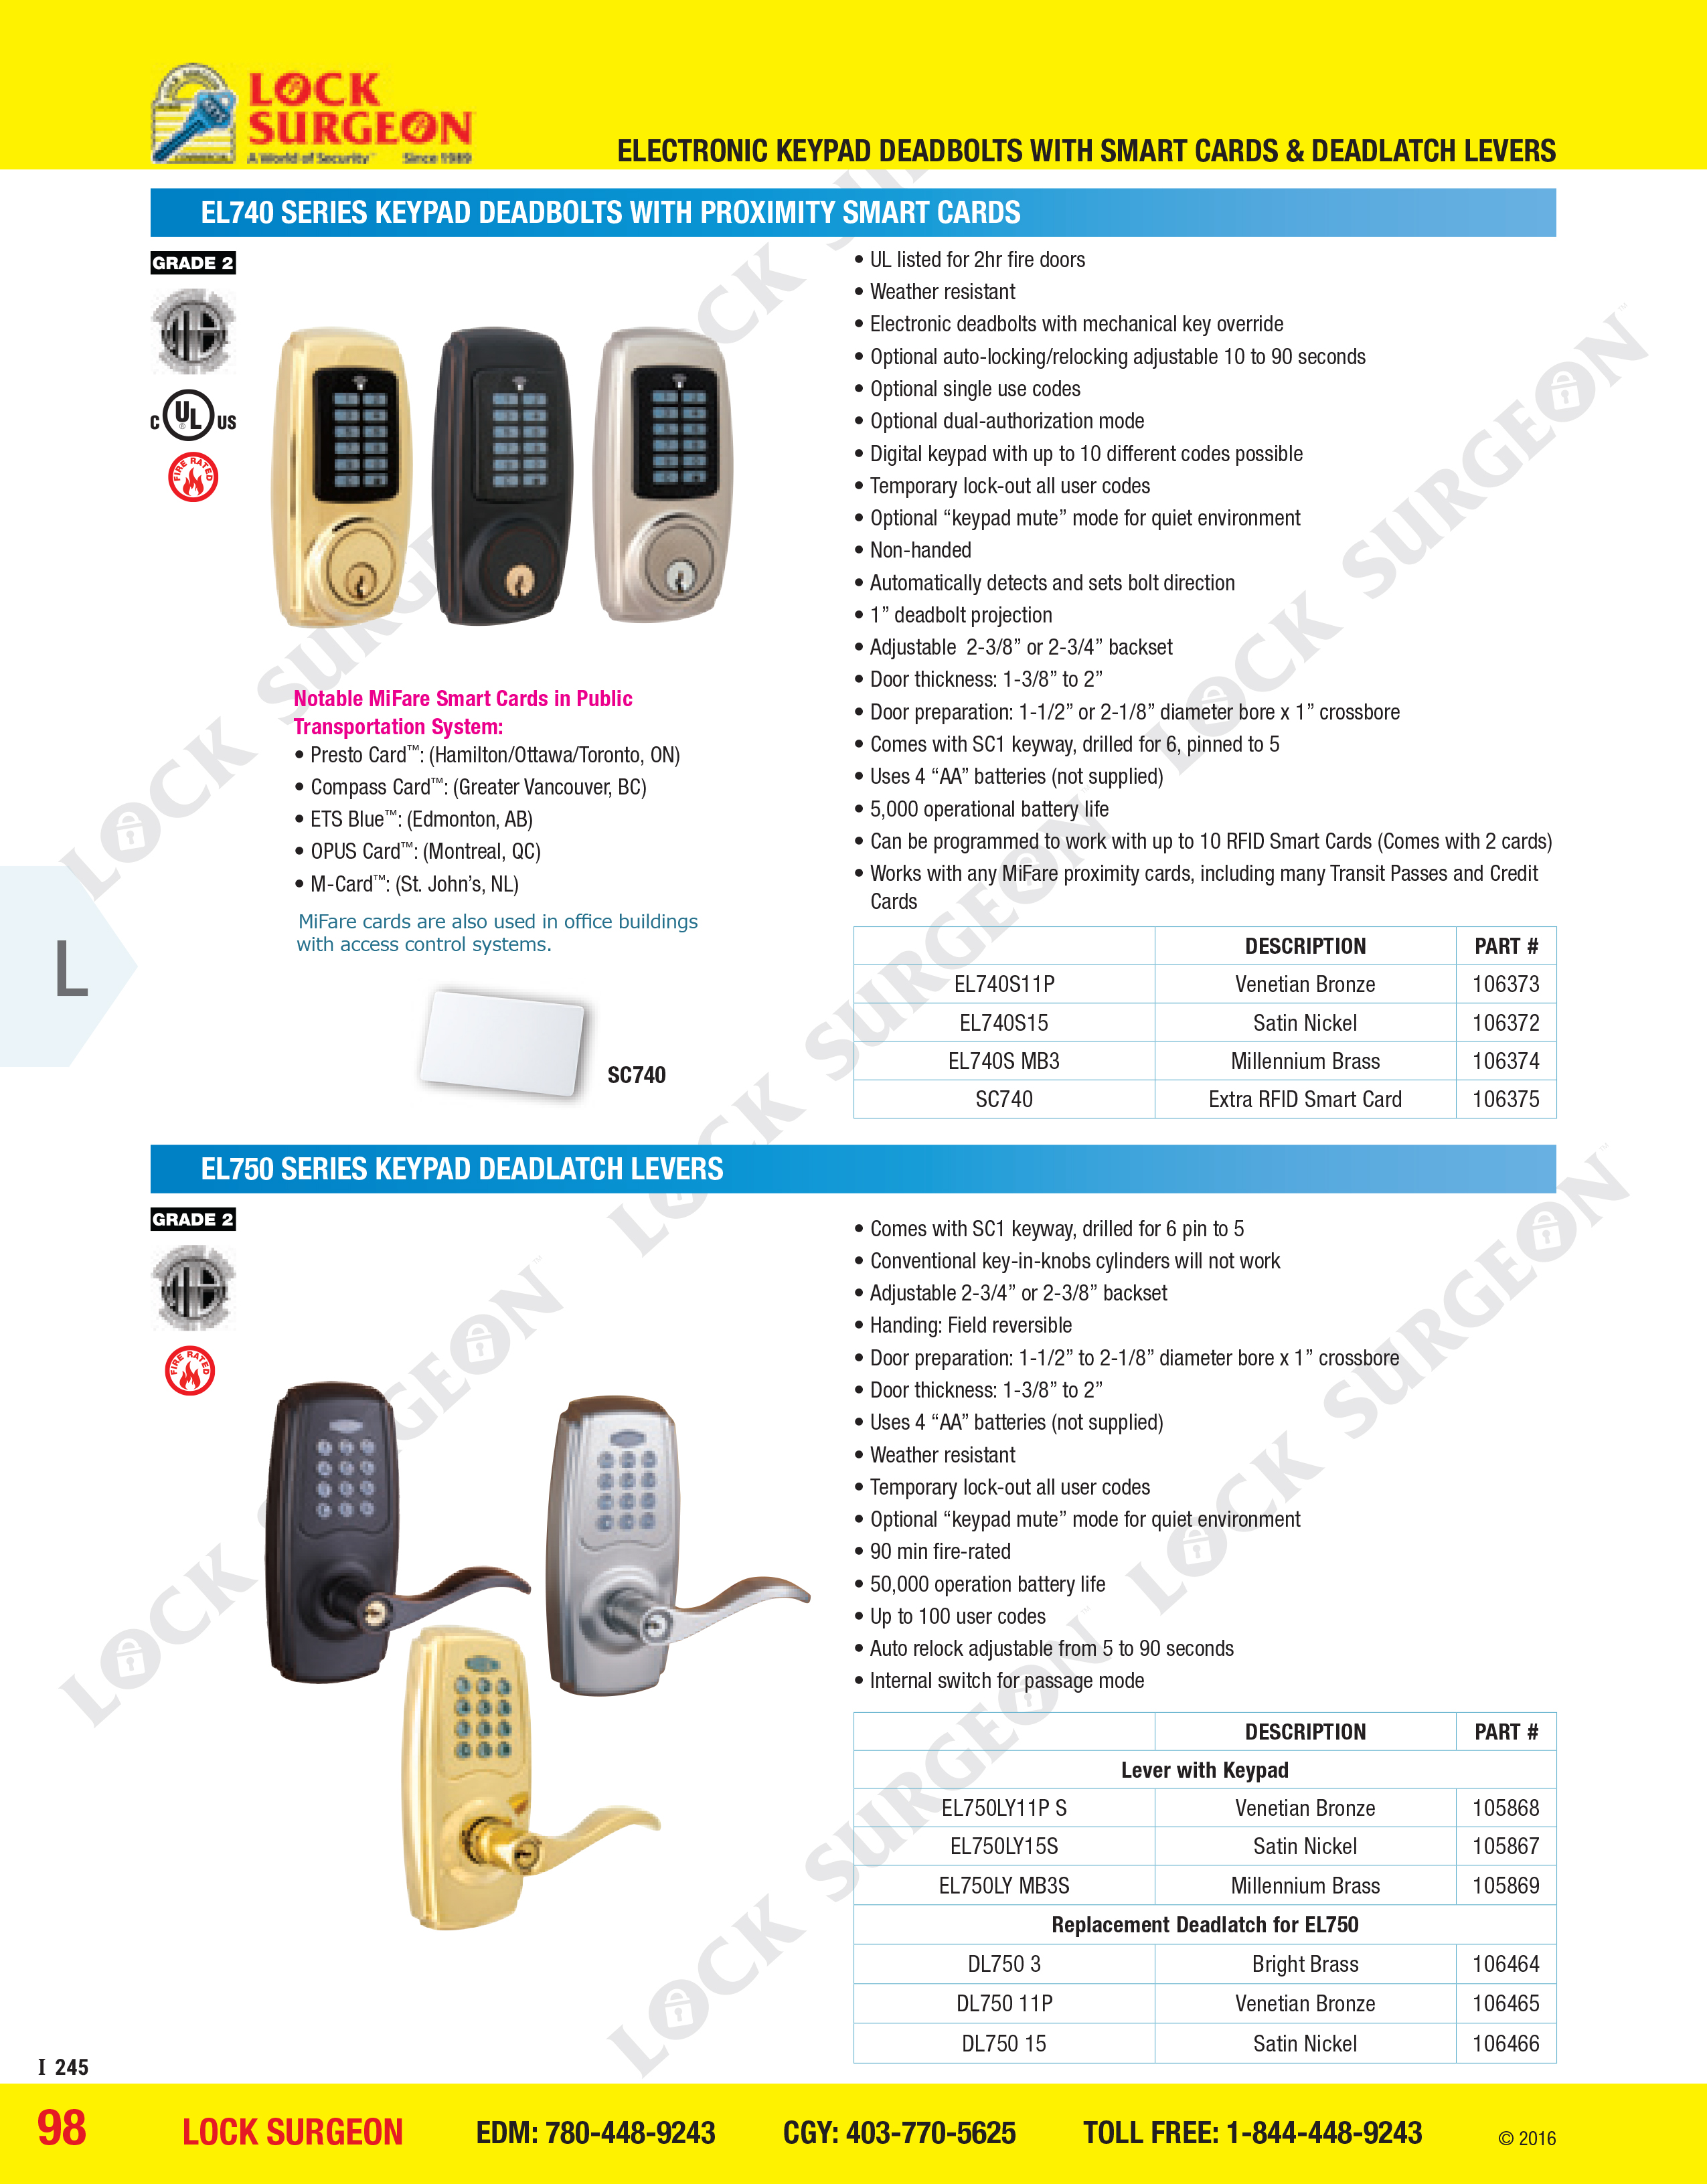 Push-button digital entry easy to use can be installed by Lock Surgeon mobile Acheson technicians.